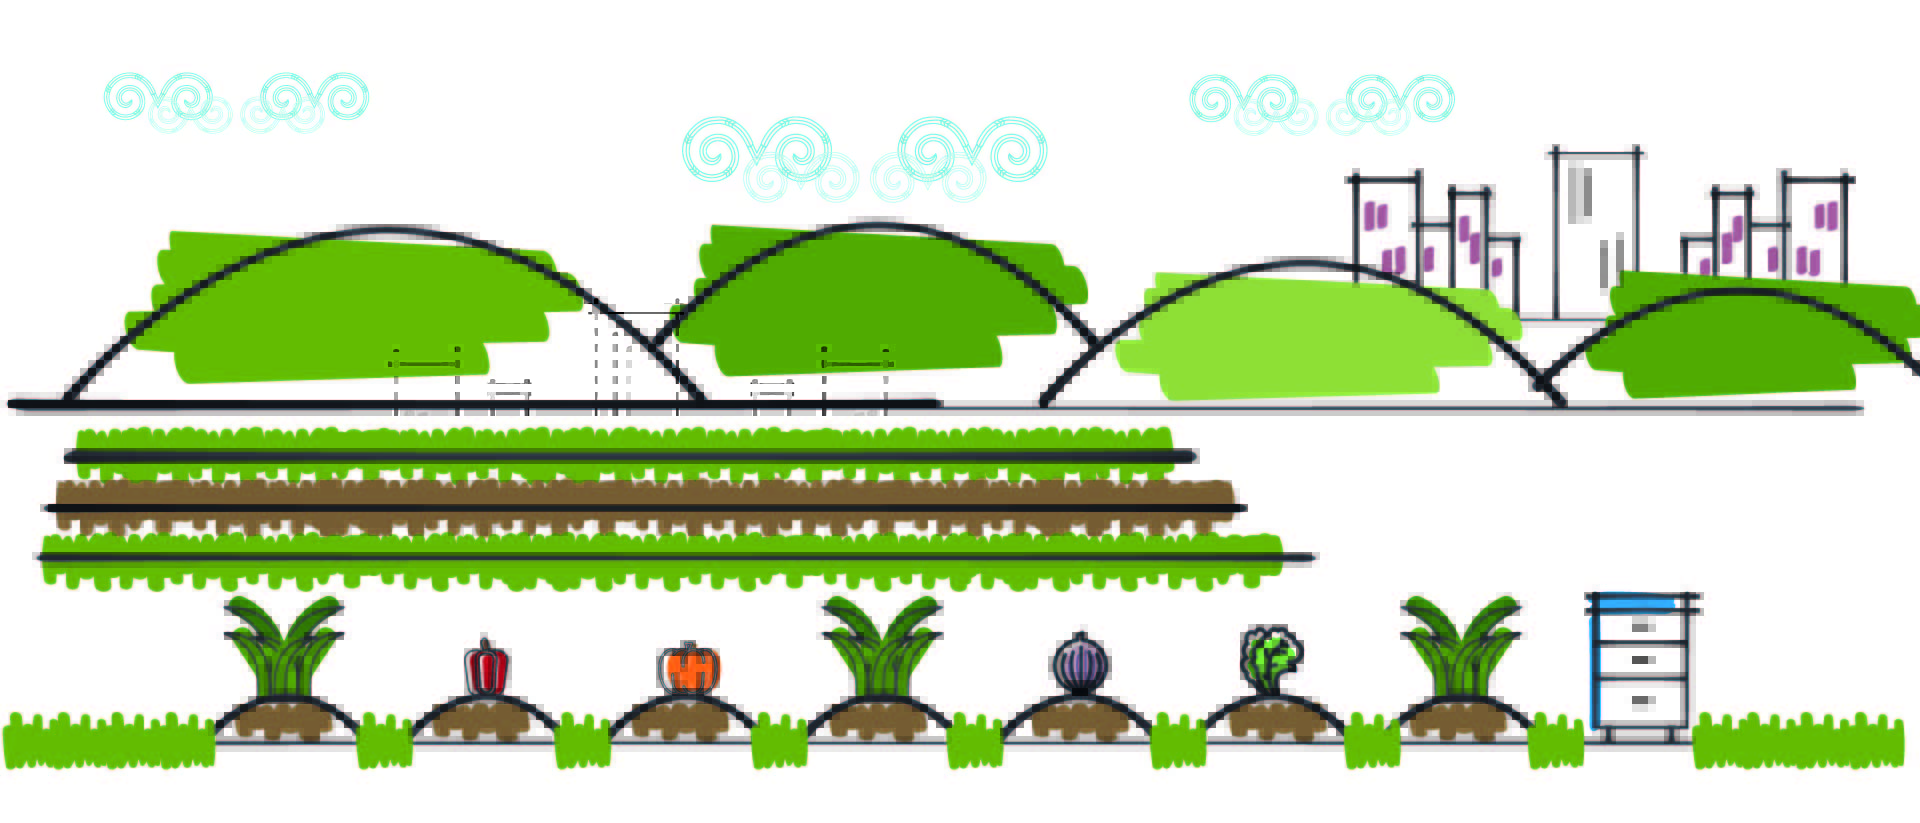 Illustration of local, sustainable food production in the fields near a city.